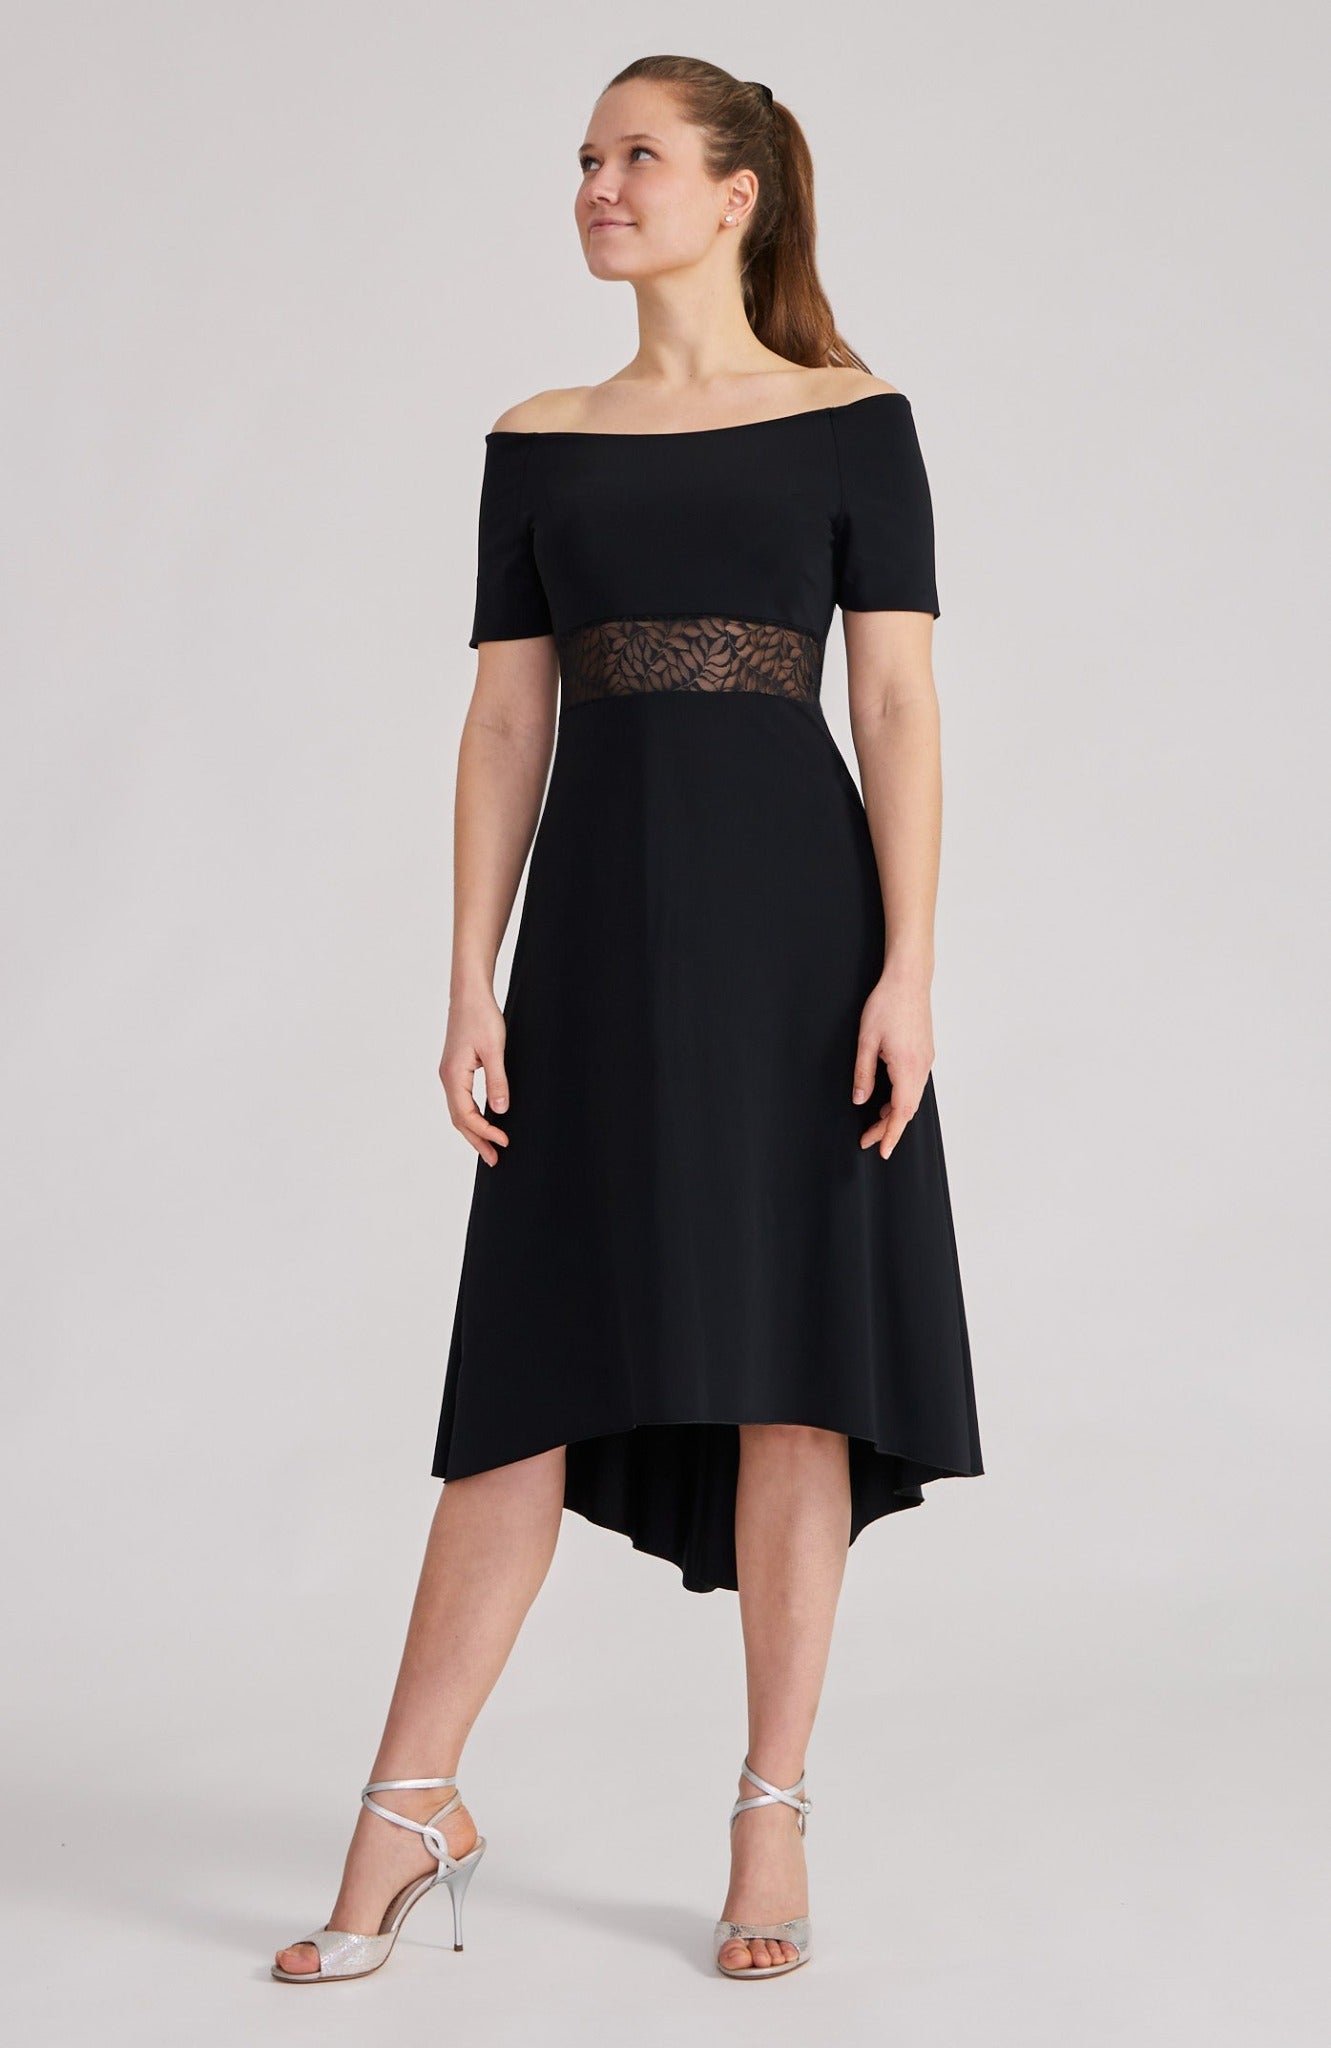 tango dress in black with lace detailing and carmen neckline